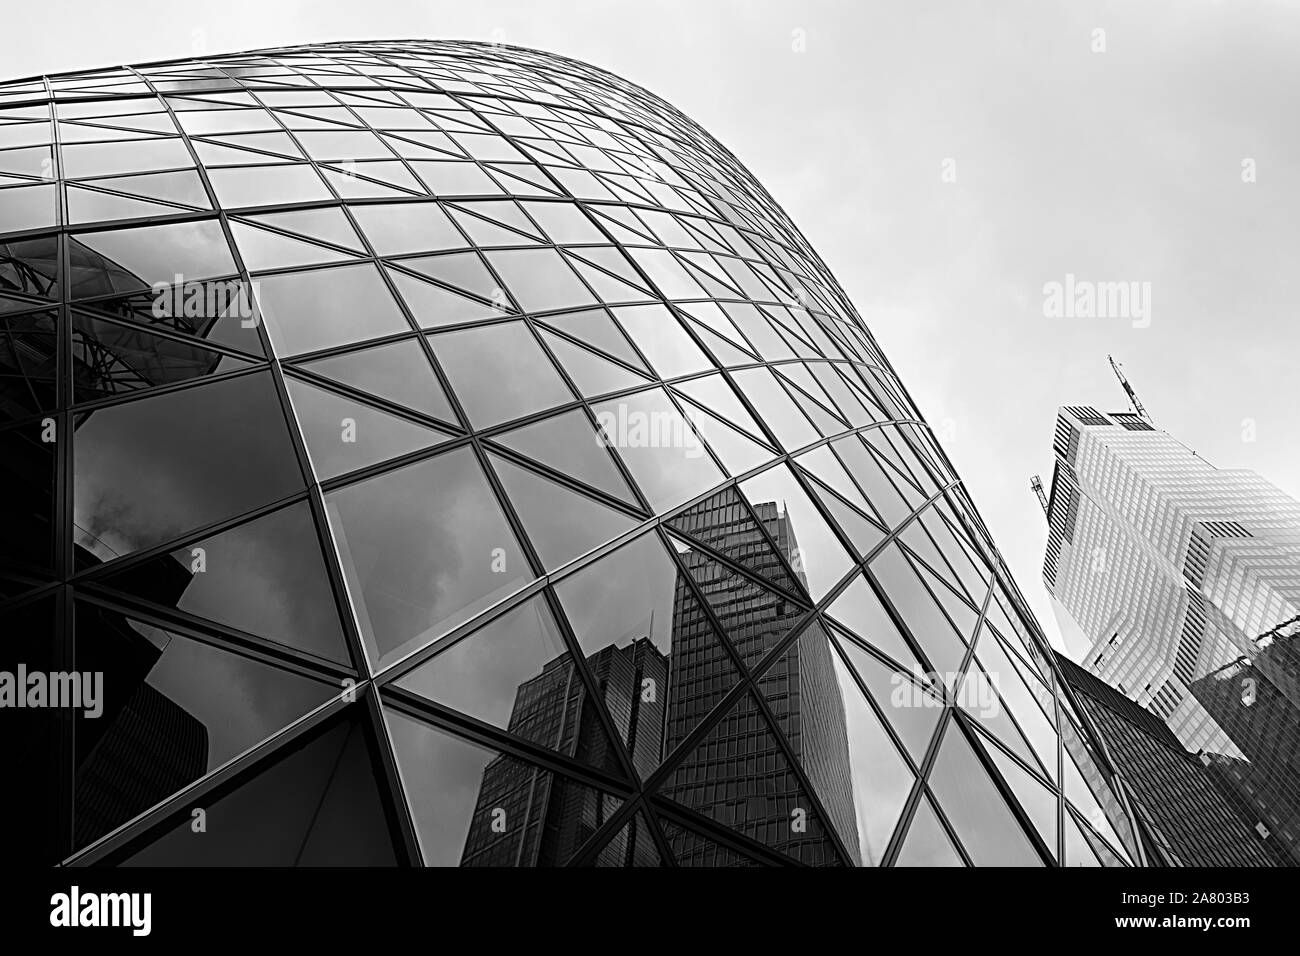 The Gherkin, 30 st mary axe skyscraper in the London City. Stock Photo